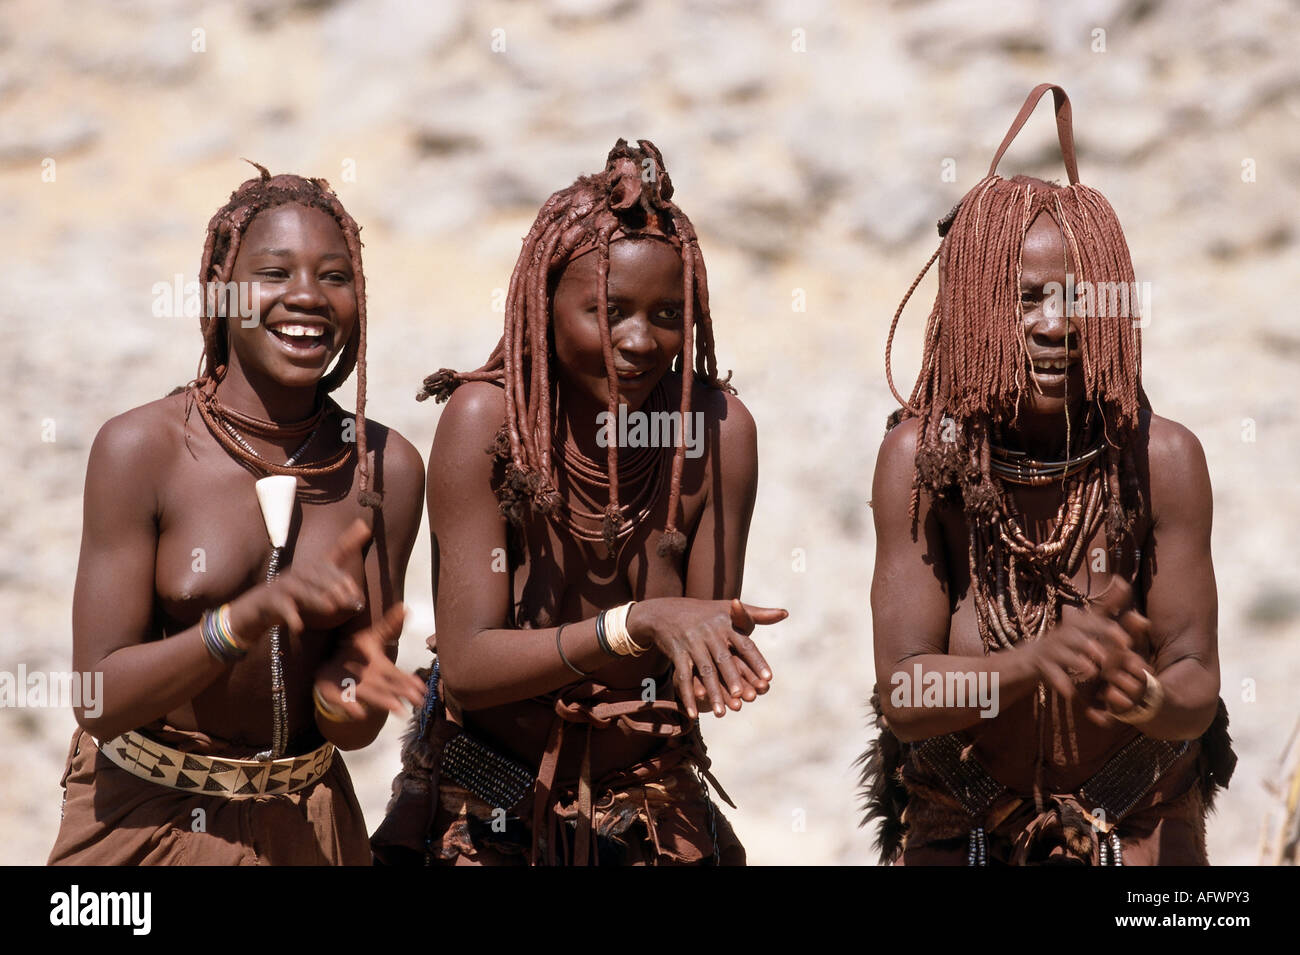 https://c8.alamy.com/comp/AFWPY3/people-women-namibia-himba-women-dancing-additional-rights-clearance-AFWPY3.jpg